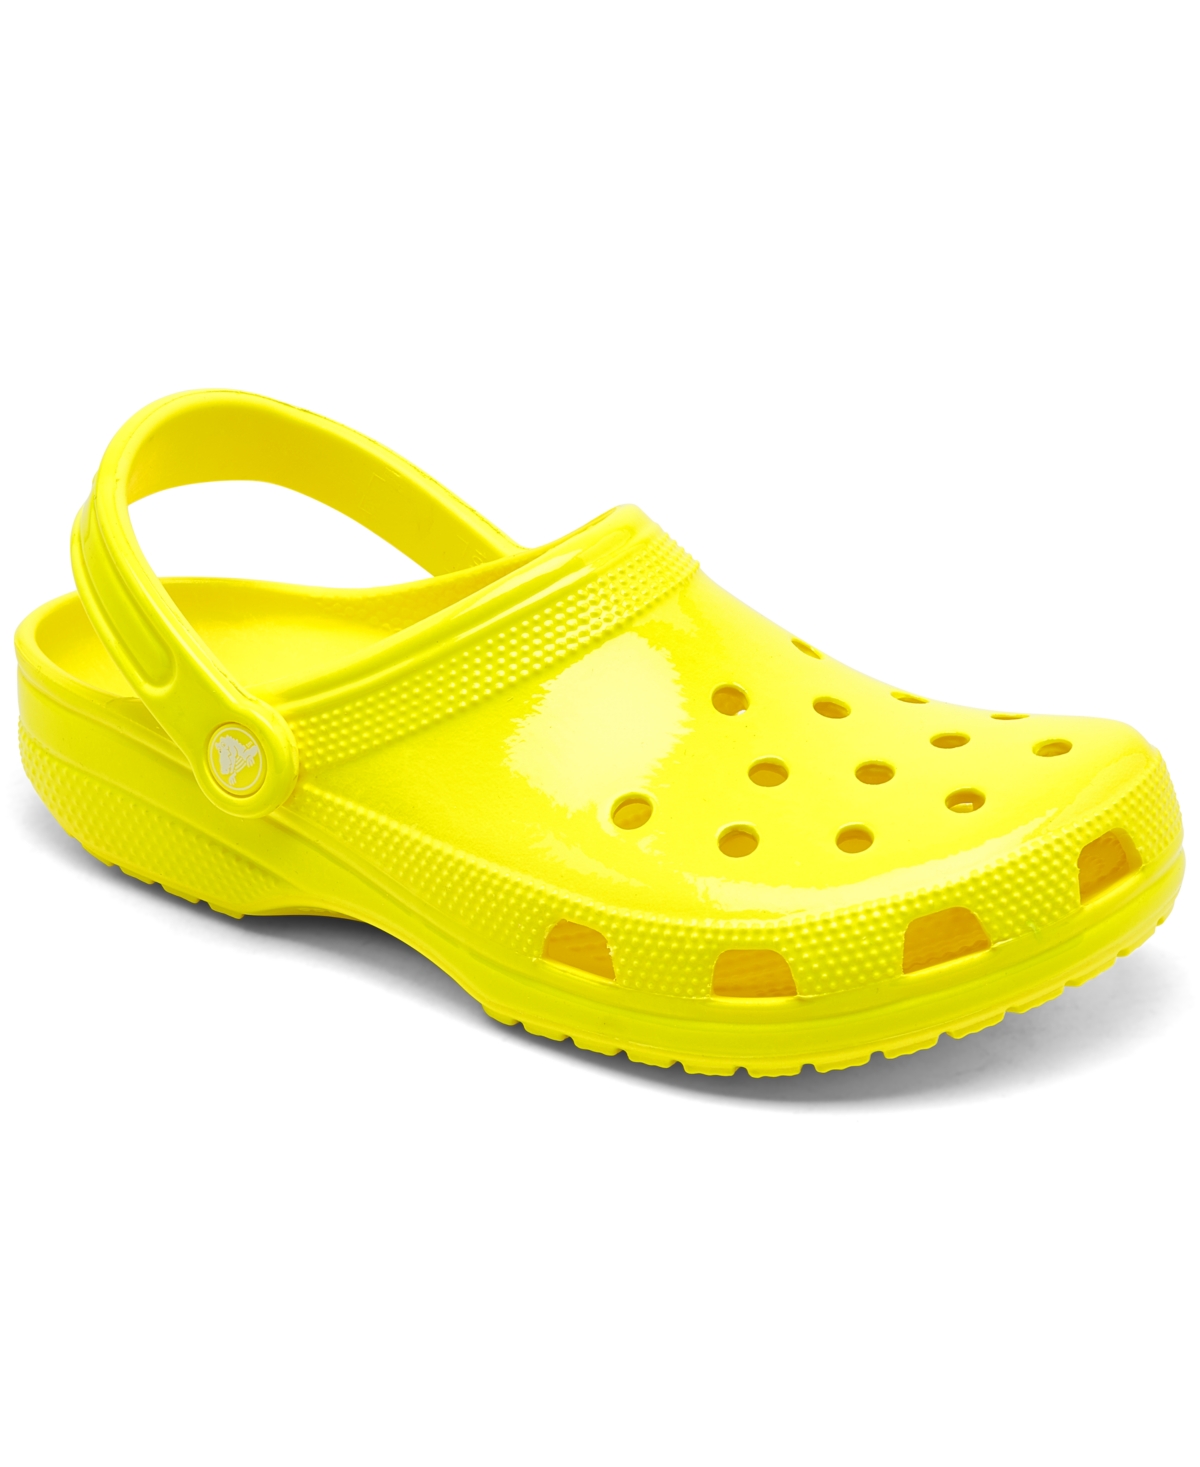 Men's Classic Neon Clogs from Finish Line - ACIDITY YELLOW